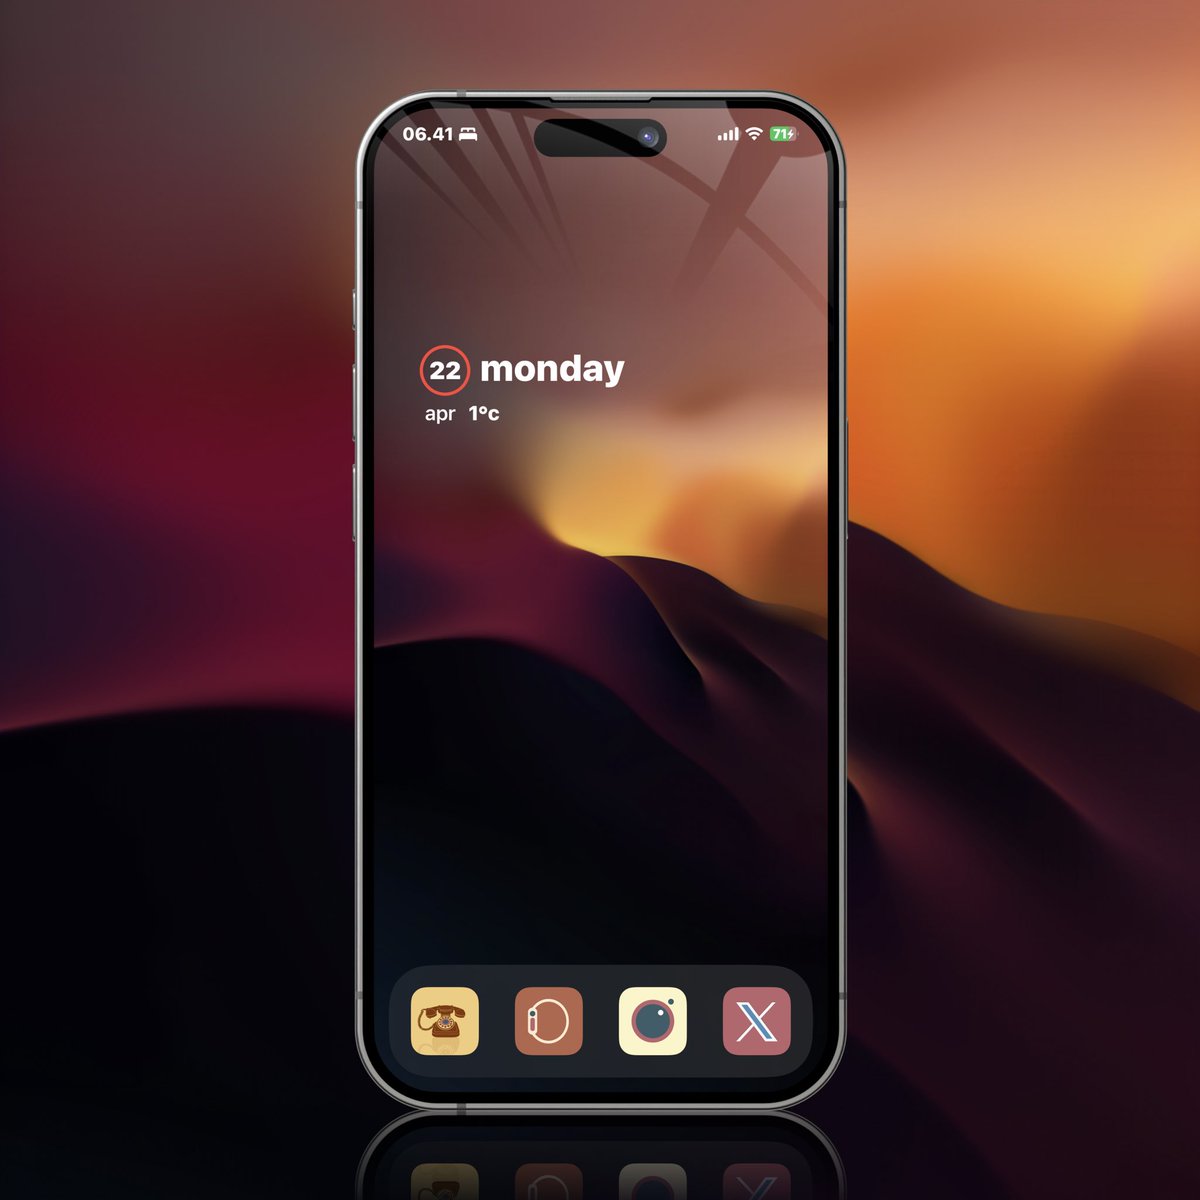 Simple take on iOS 

#ios1741 #iphone12pm #nojailbreak #widgy #MockupM 

• wallpaper @SeanKly #M 
• icons @MyLoveJewels #r3tr0 
• widgy widget @Zooropalg 
• template @SeanKly #M